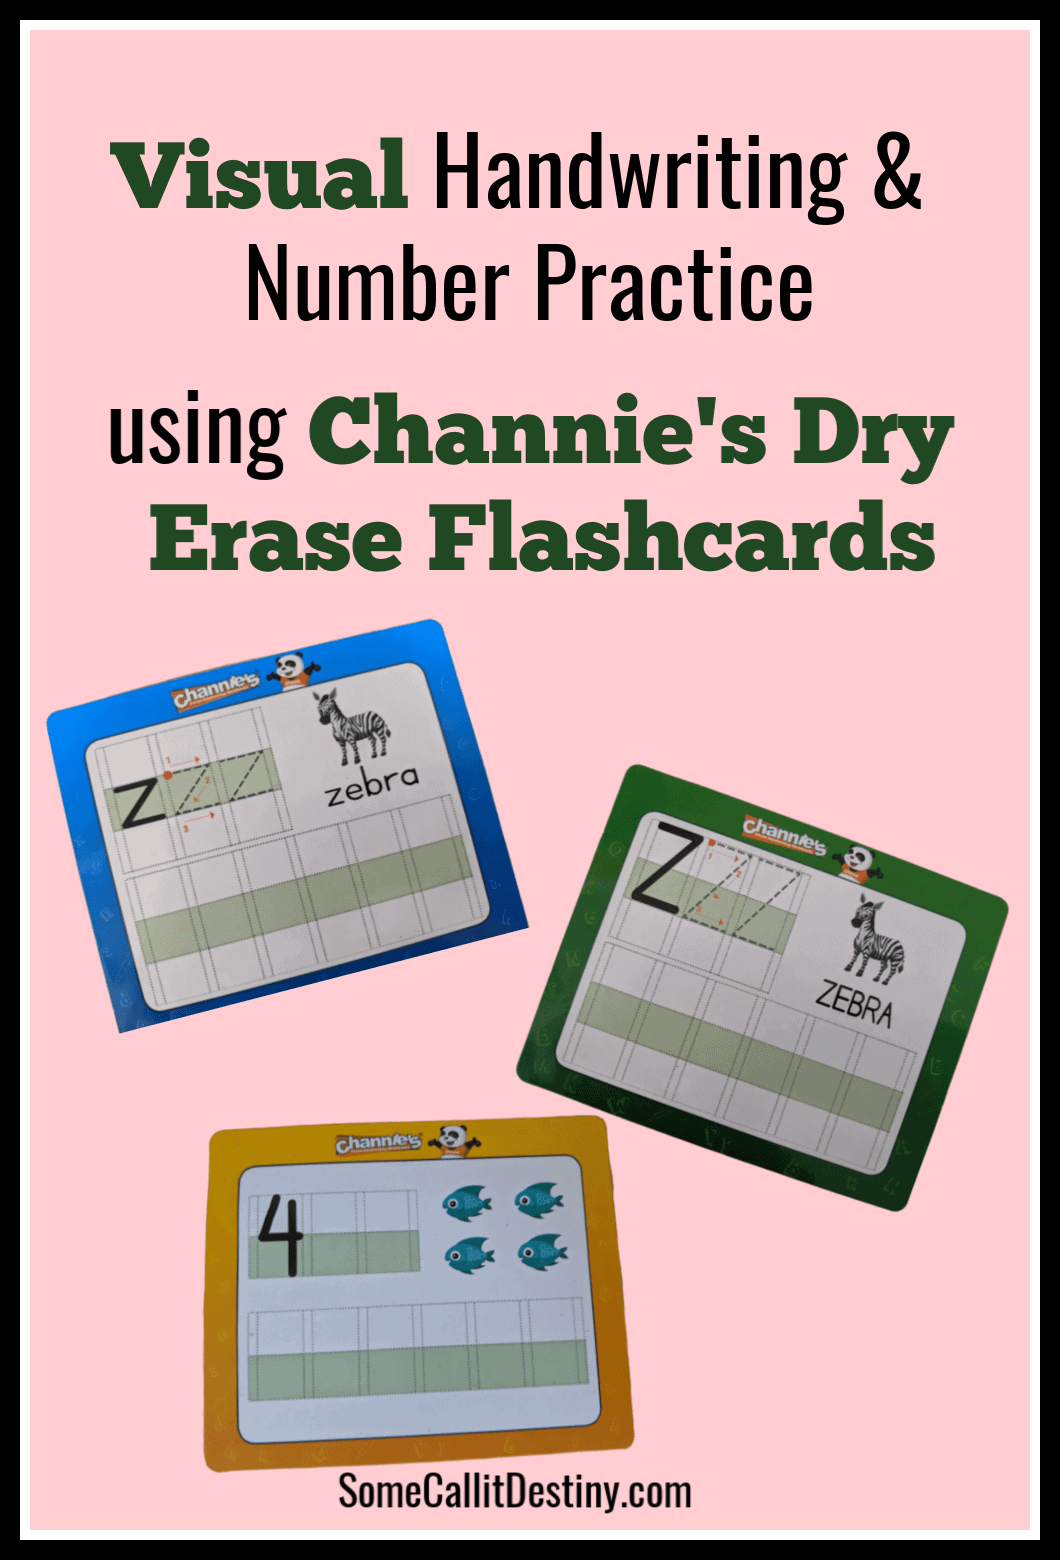 Channie's dry erase flashcards for handwriting practice